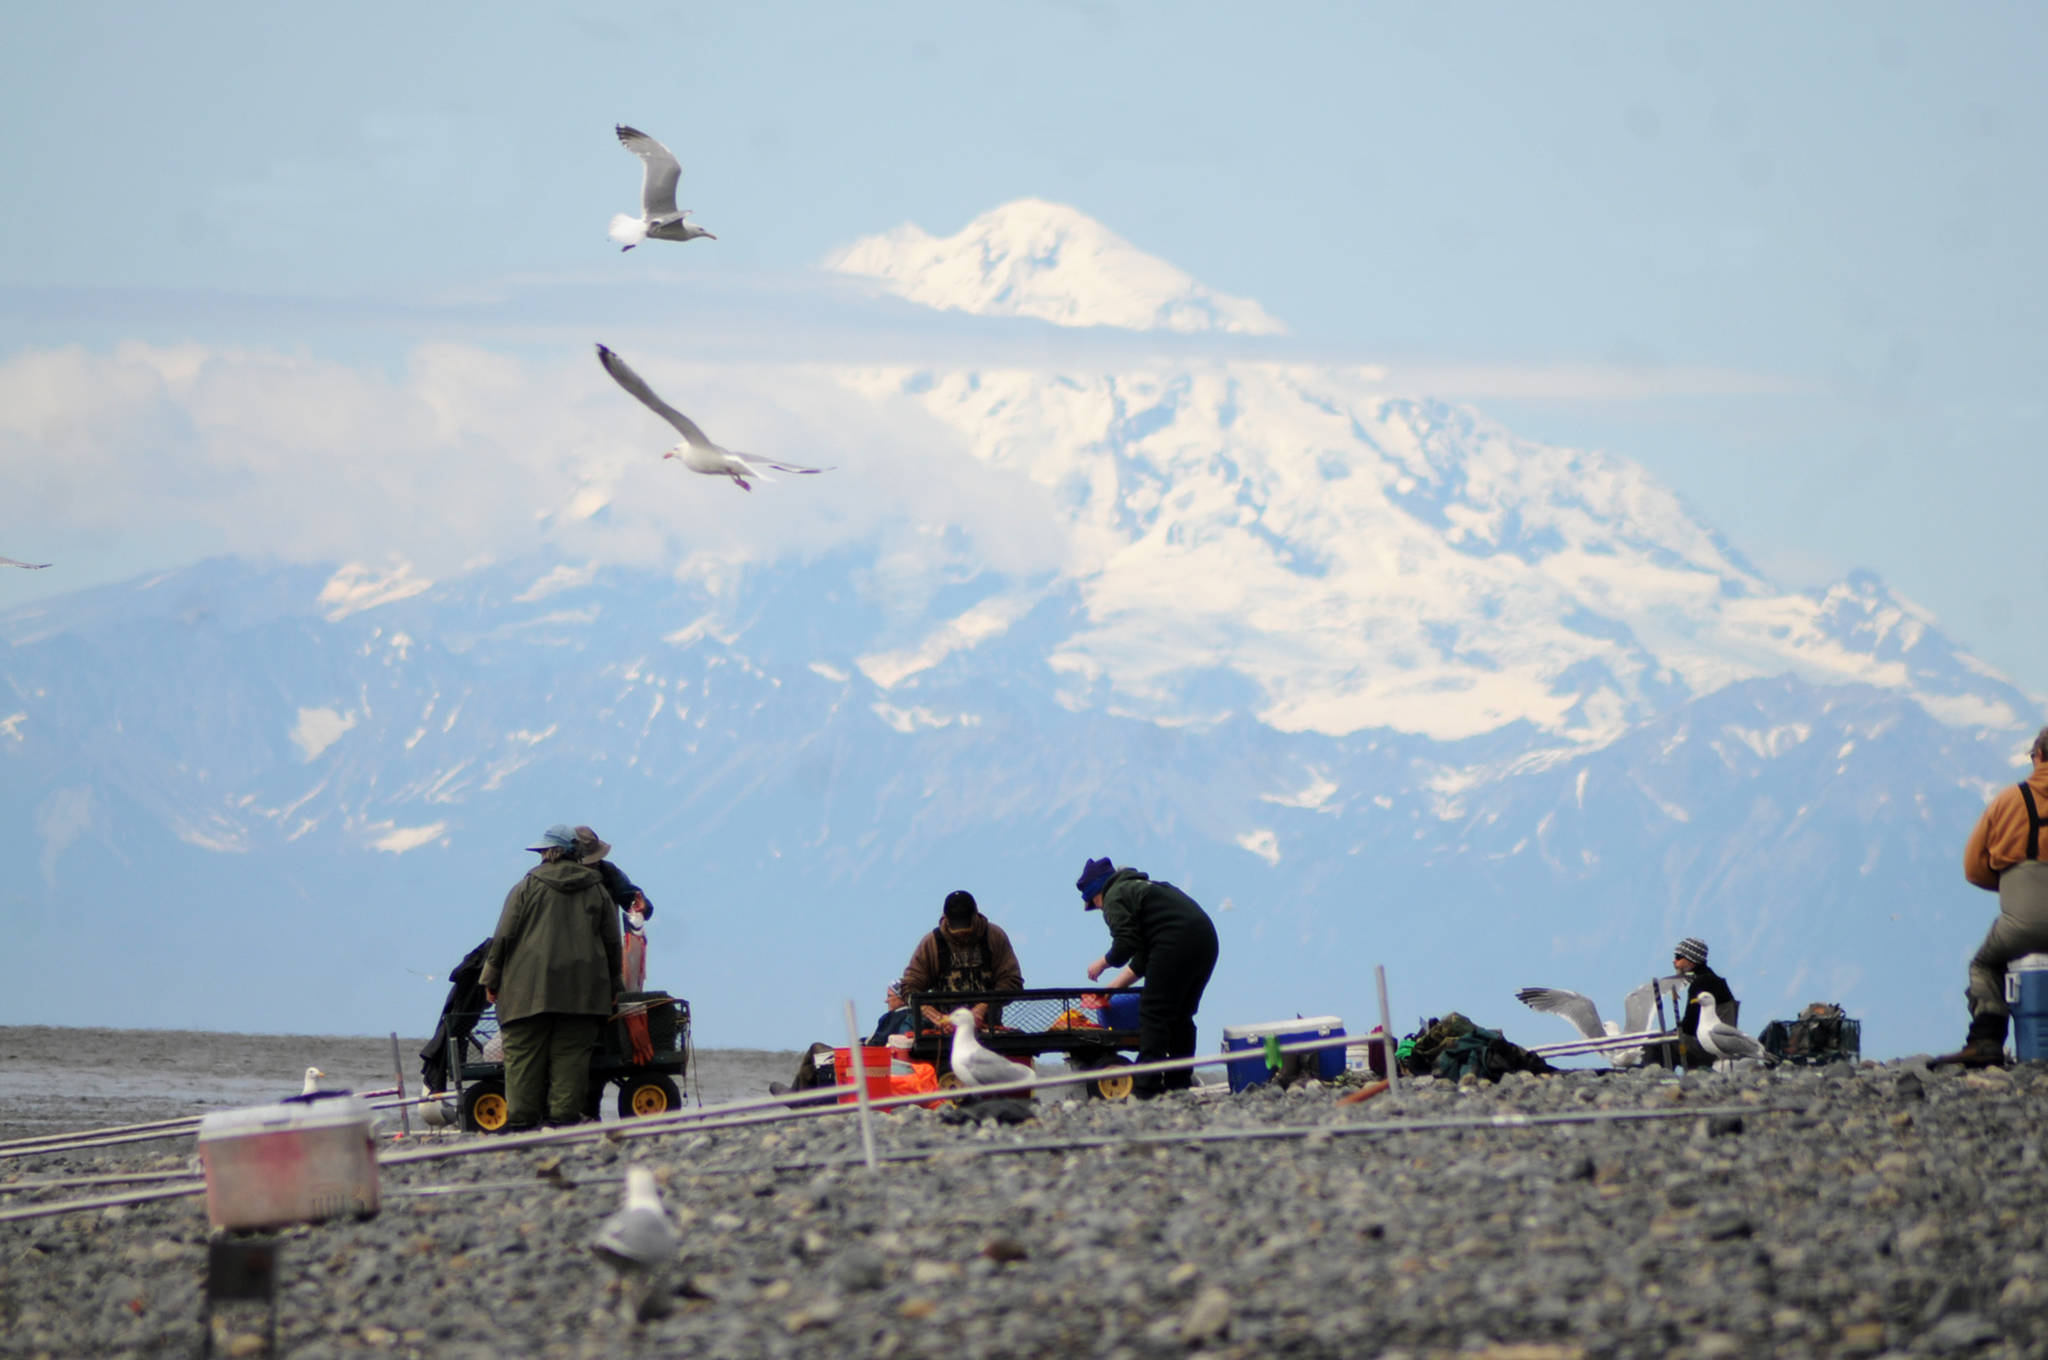 Mt. Redoubt looms over dipnetters on the north Kenai Beach on Tuesday, July 11, 2017 in Kenai, Alaska. Tuesday was the second day of the Kenai River personal-use dipnet fishery, which will remain open until July 31. The fishery was relatively quiet Tuesday, with a dipnetter hauling in a fish every once in awhile, and unlike many July weekends, there was plenty of room in the water for more participants. (Photo by Elizabeth Earl/Peninsula Clarion)